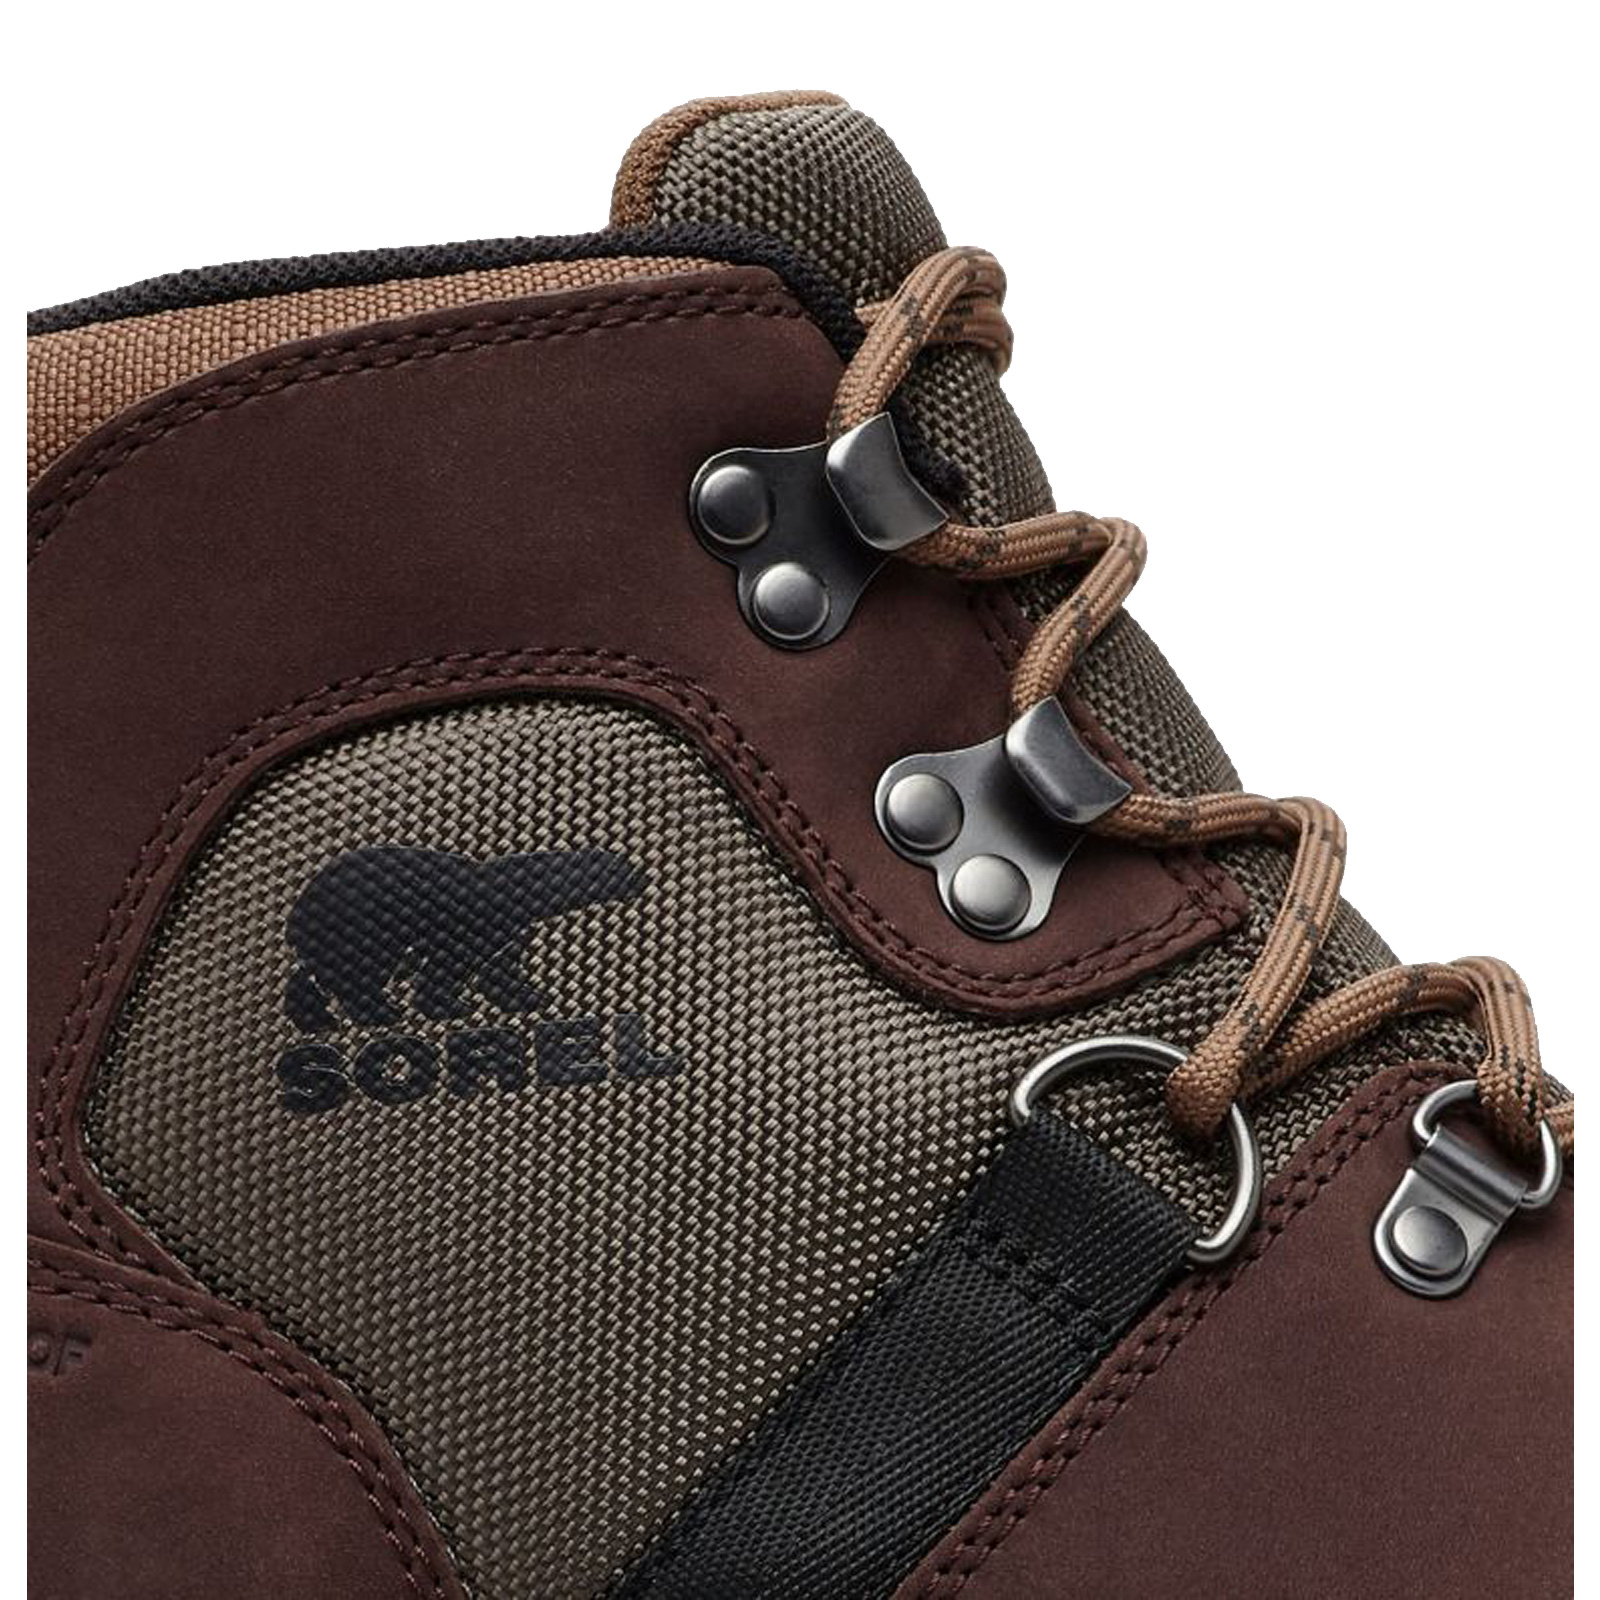 Sorel Mens Madson Sport Hiker Boots Waterproof Leather Casual Hiking Shoes | eBay